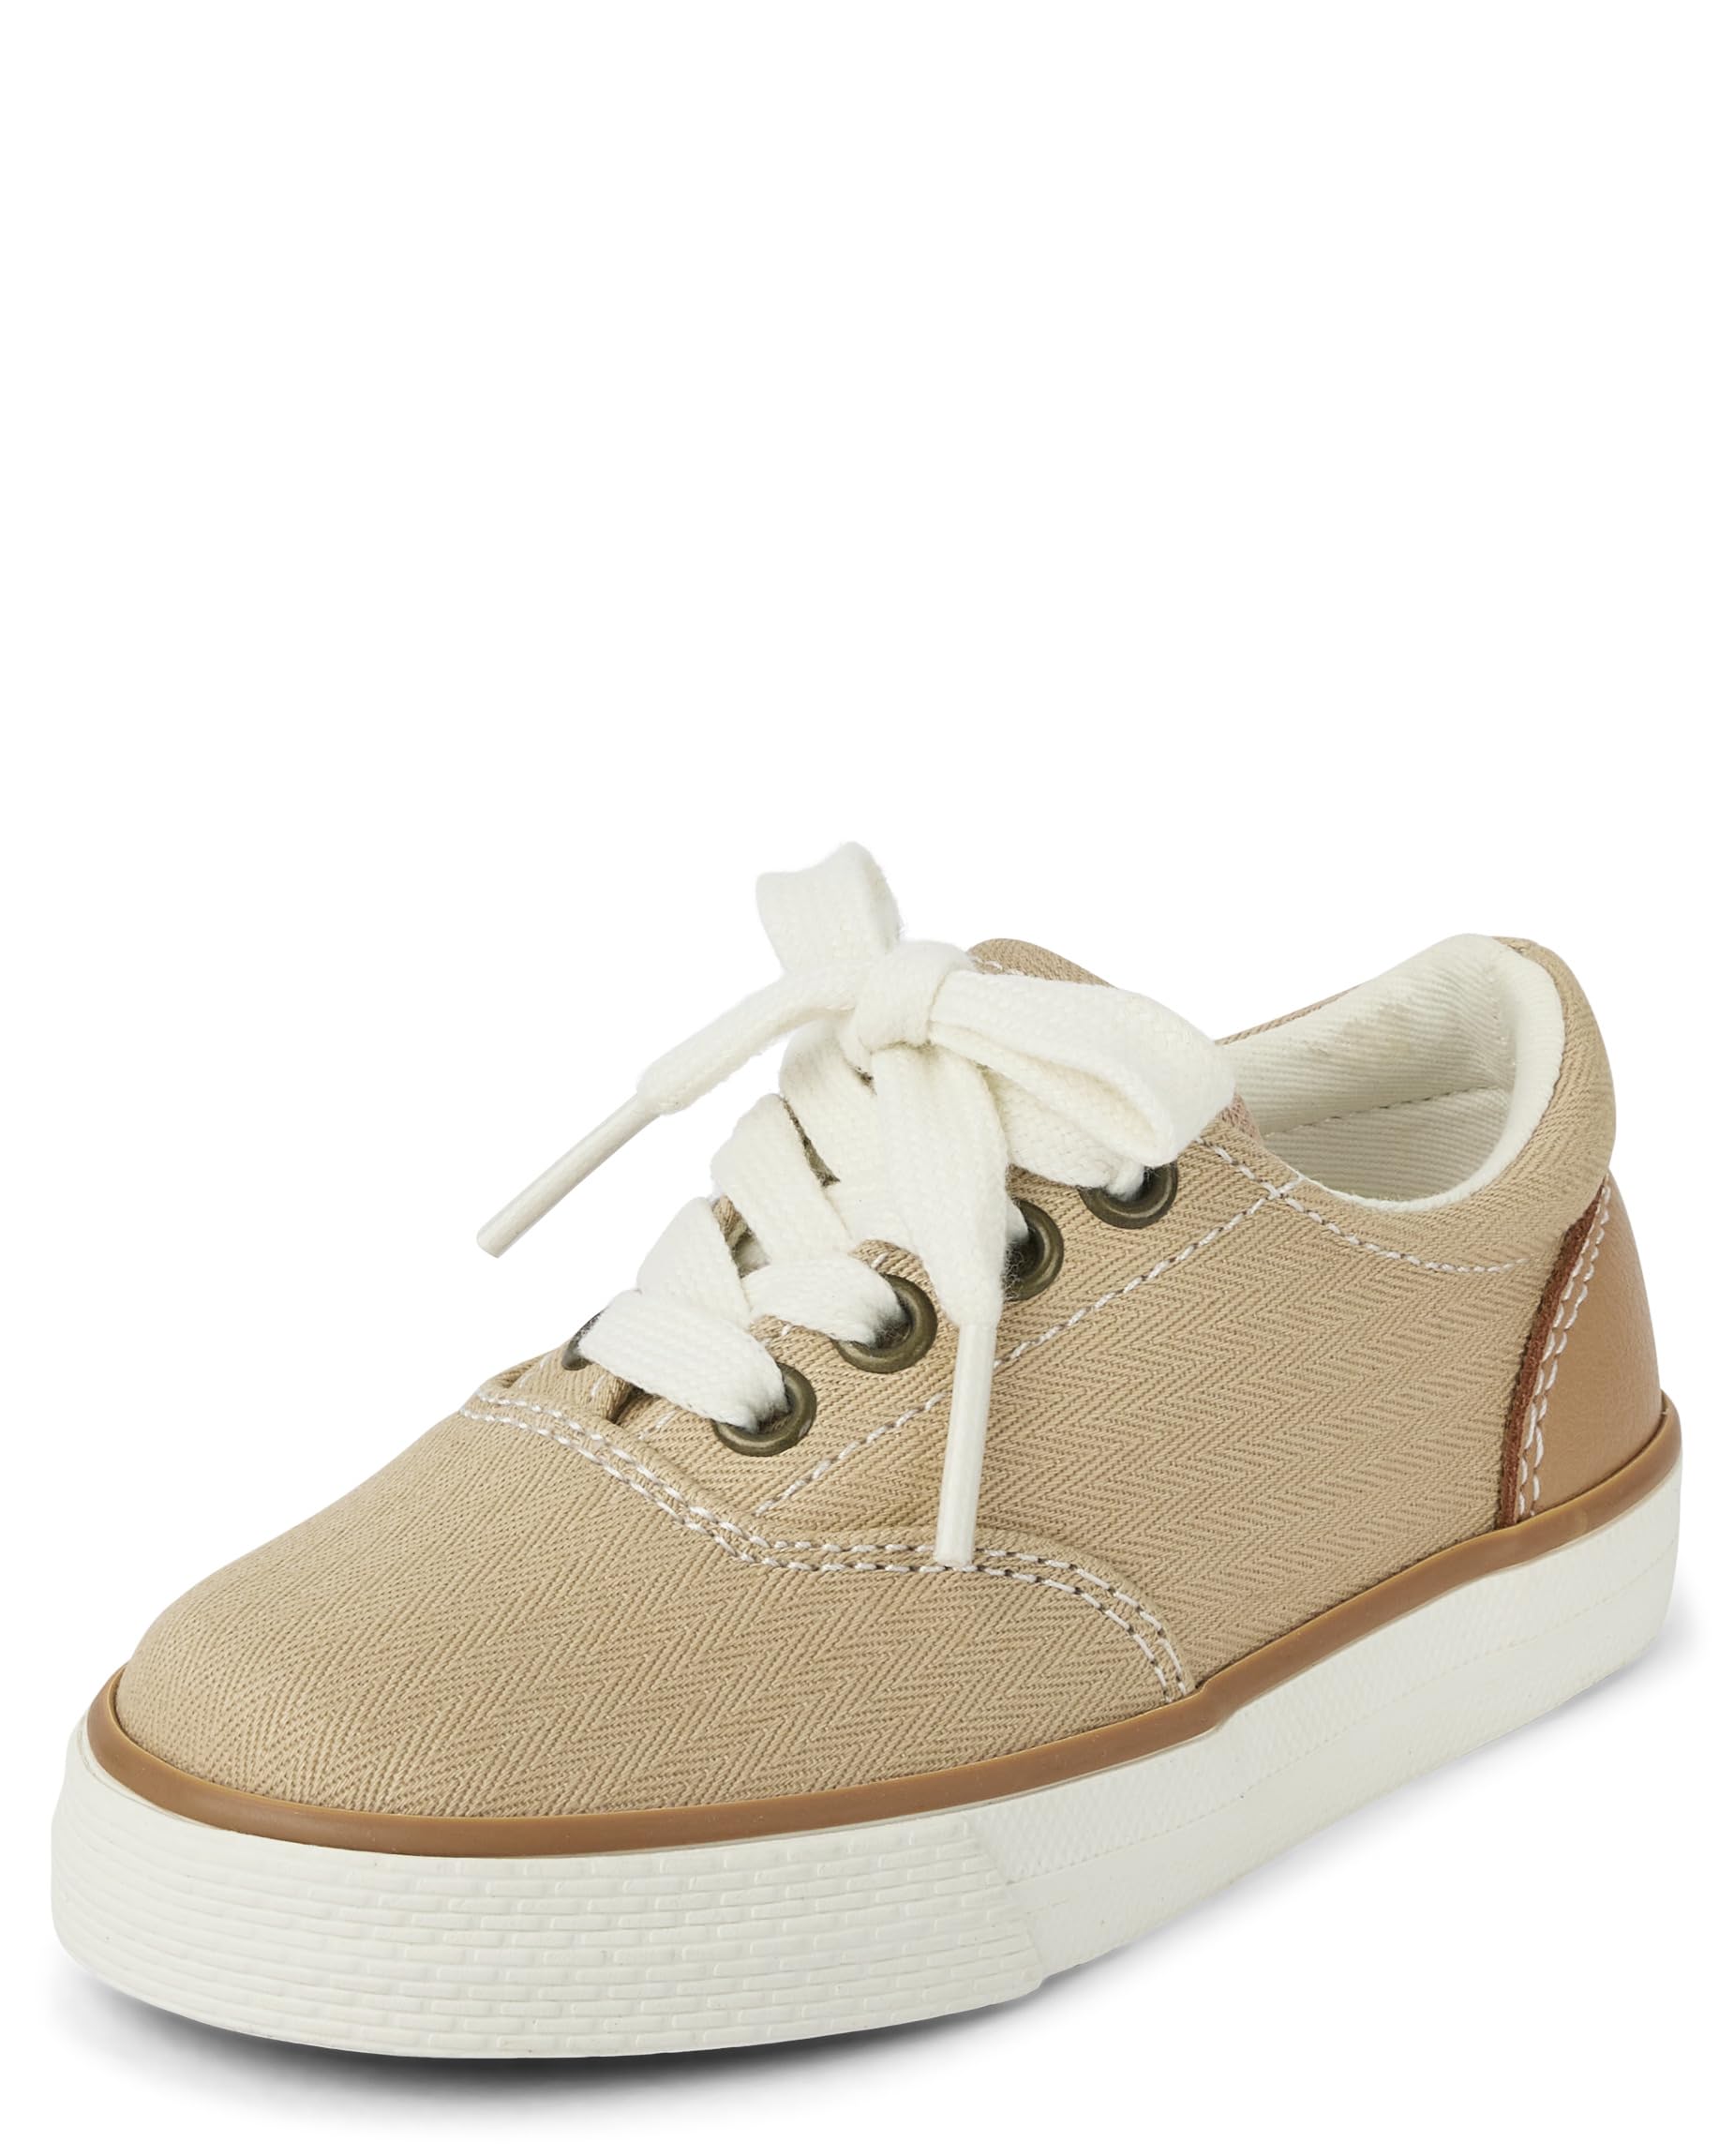 The Children's Place Baby Boys Casual Lace Up Low Top Sneakers, Tan Canvas